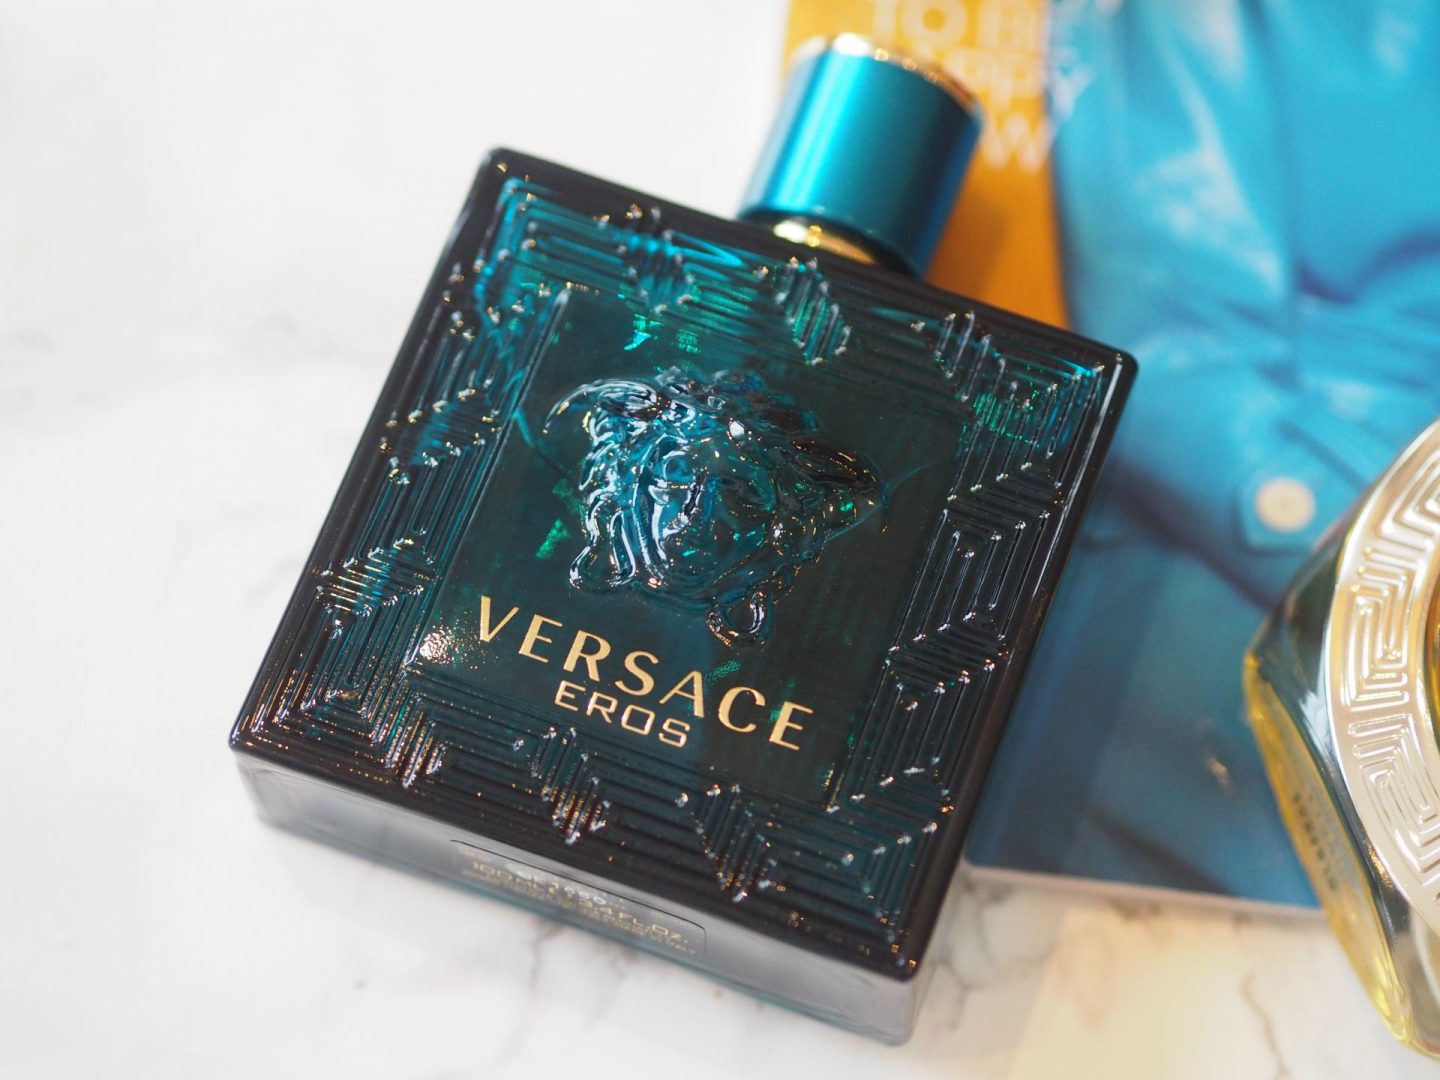 versace limited edition perfume